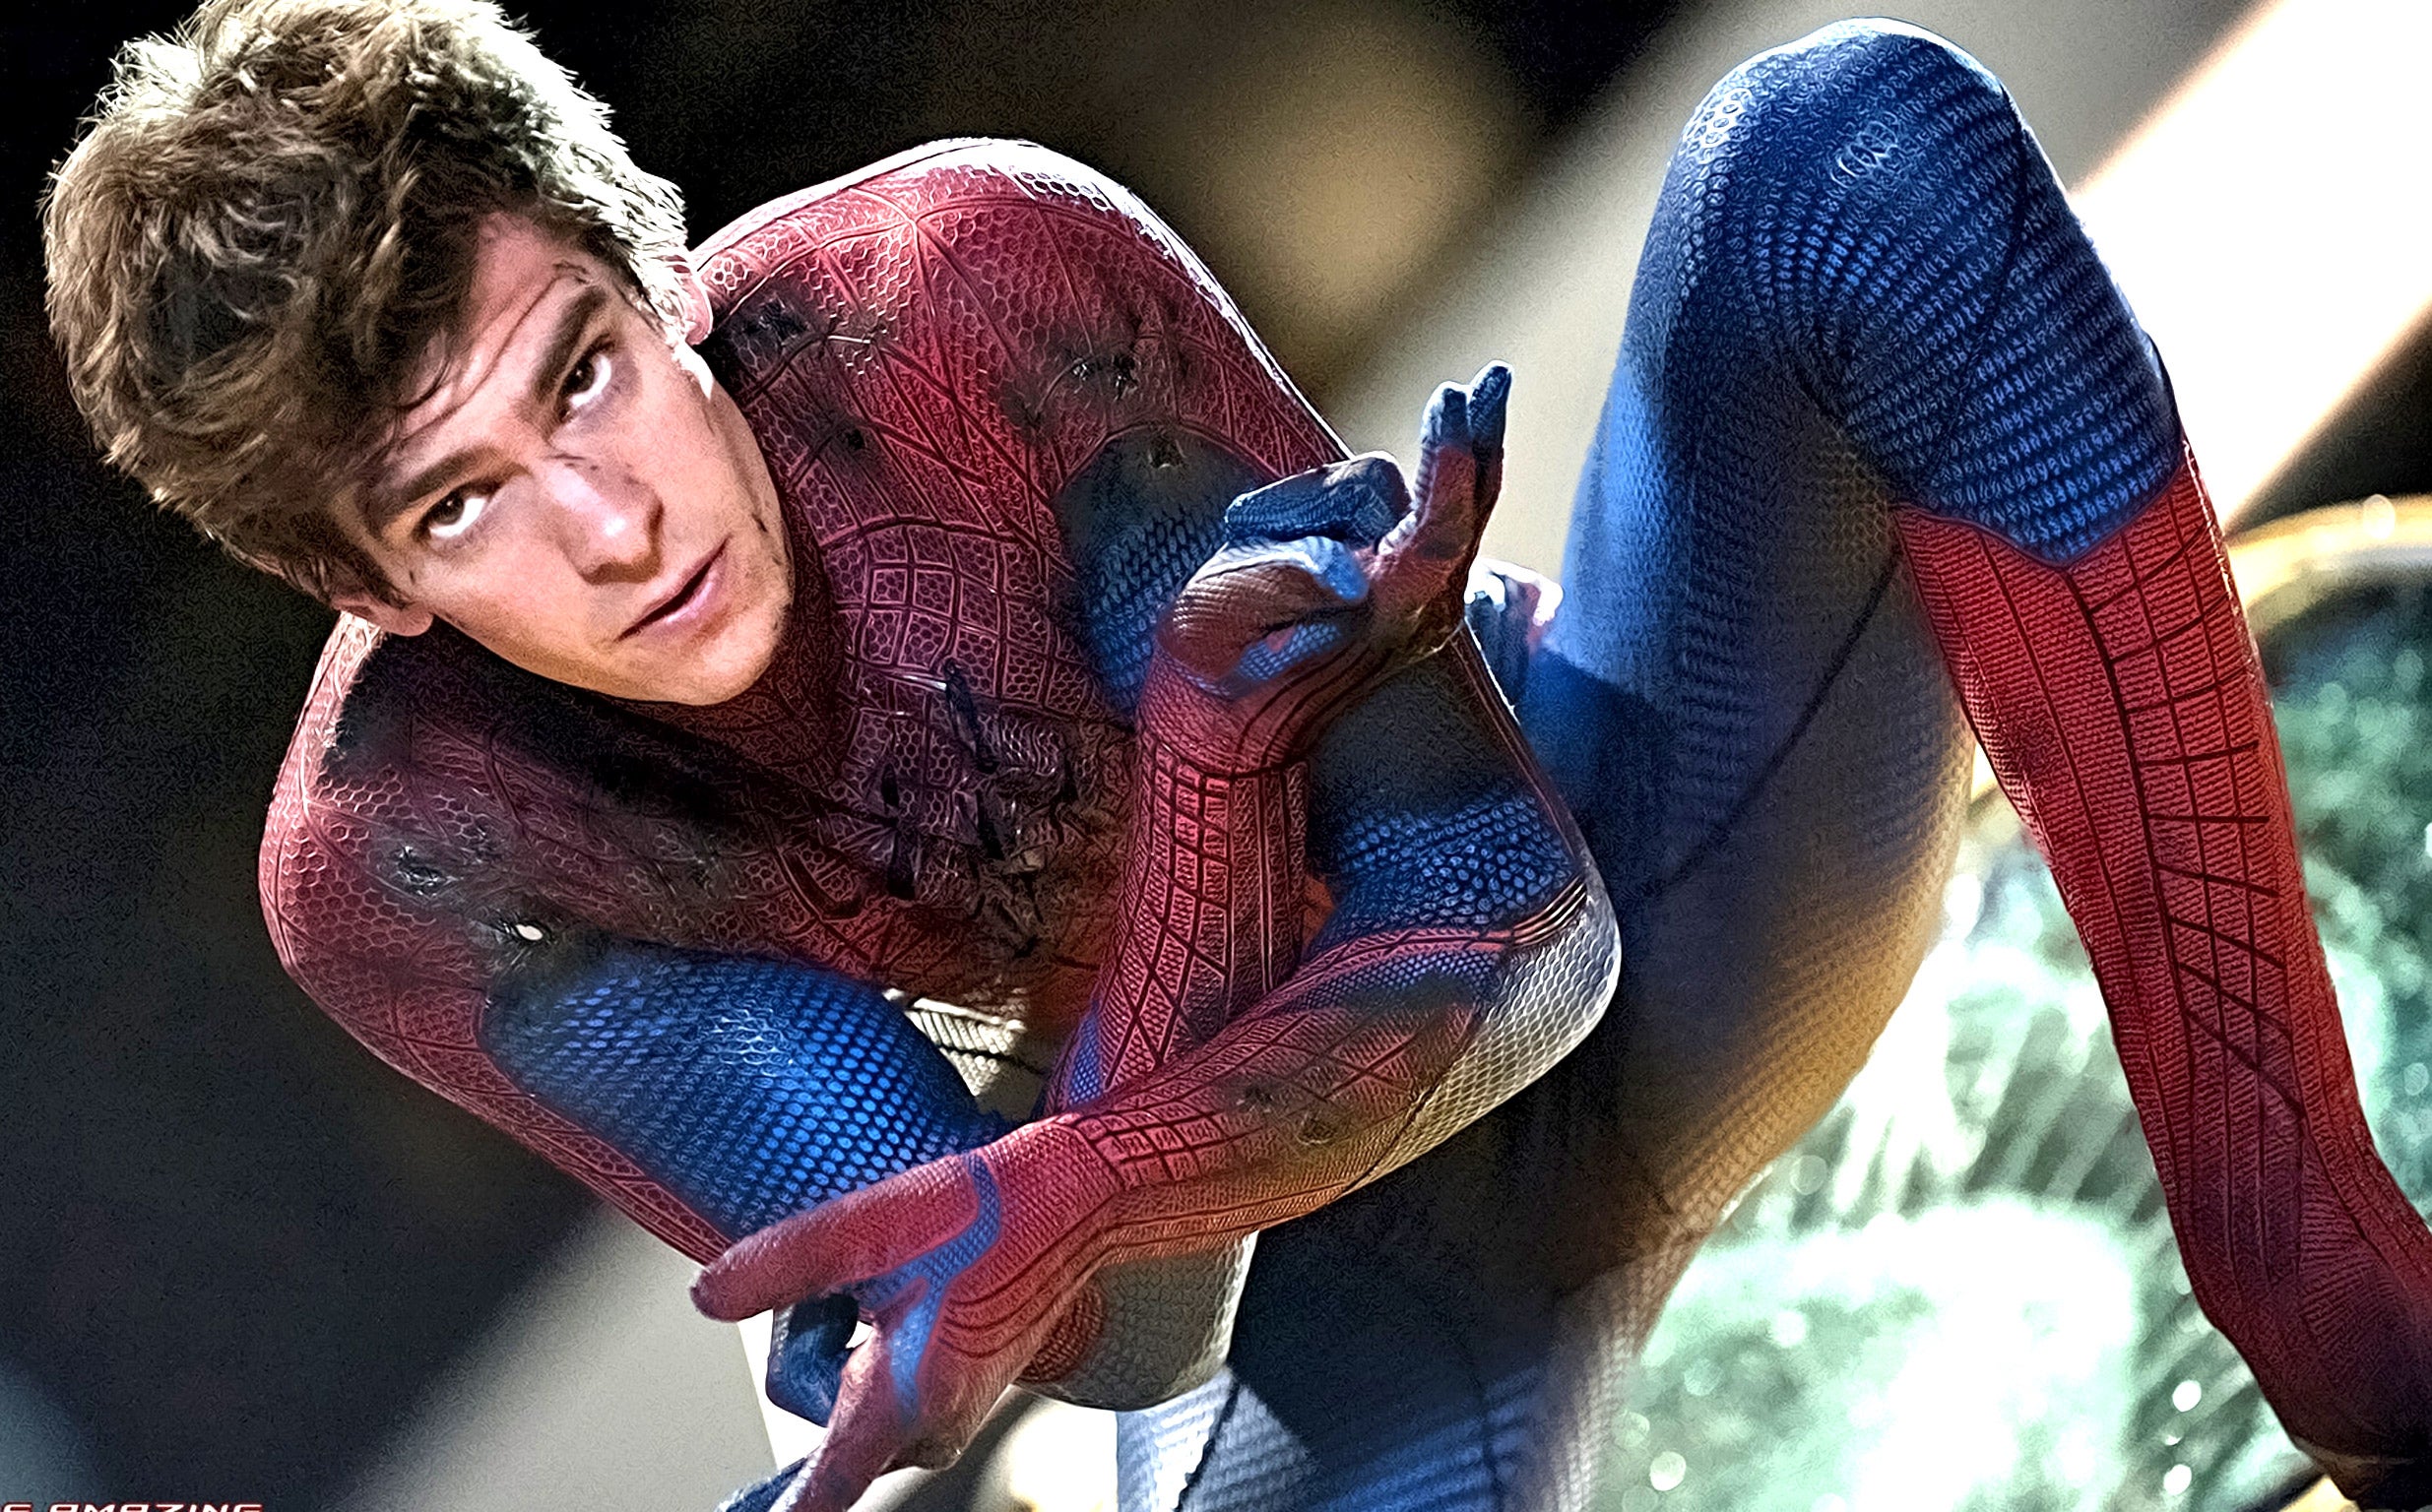 Andrew Garfield as Spider-Man. The actor’s father is Jewish